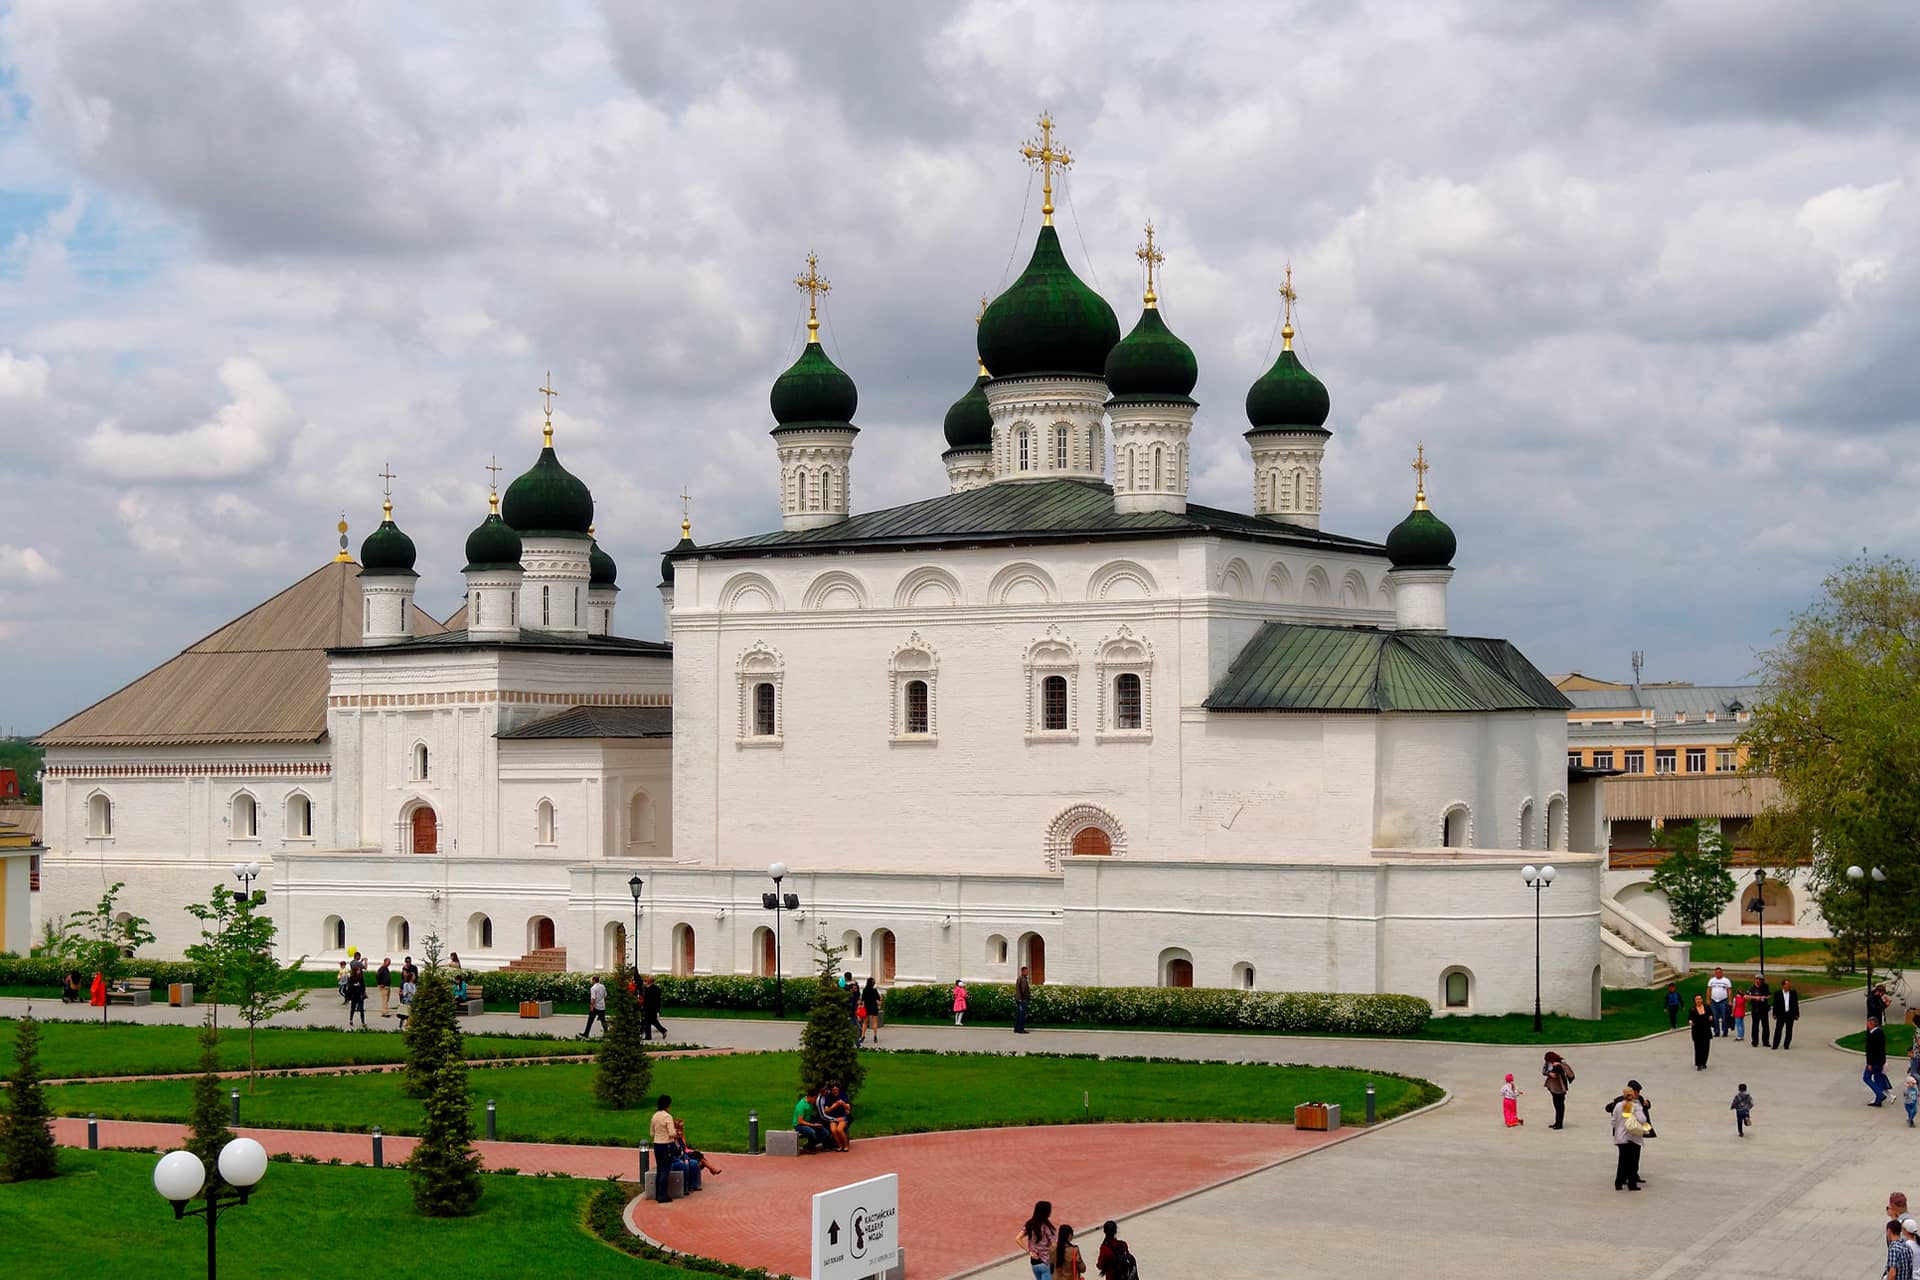 A white orthodox church consisting of two parts with many dark green domes